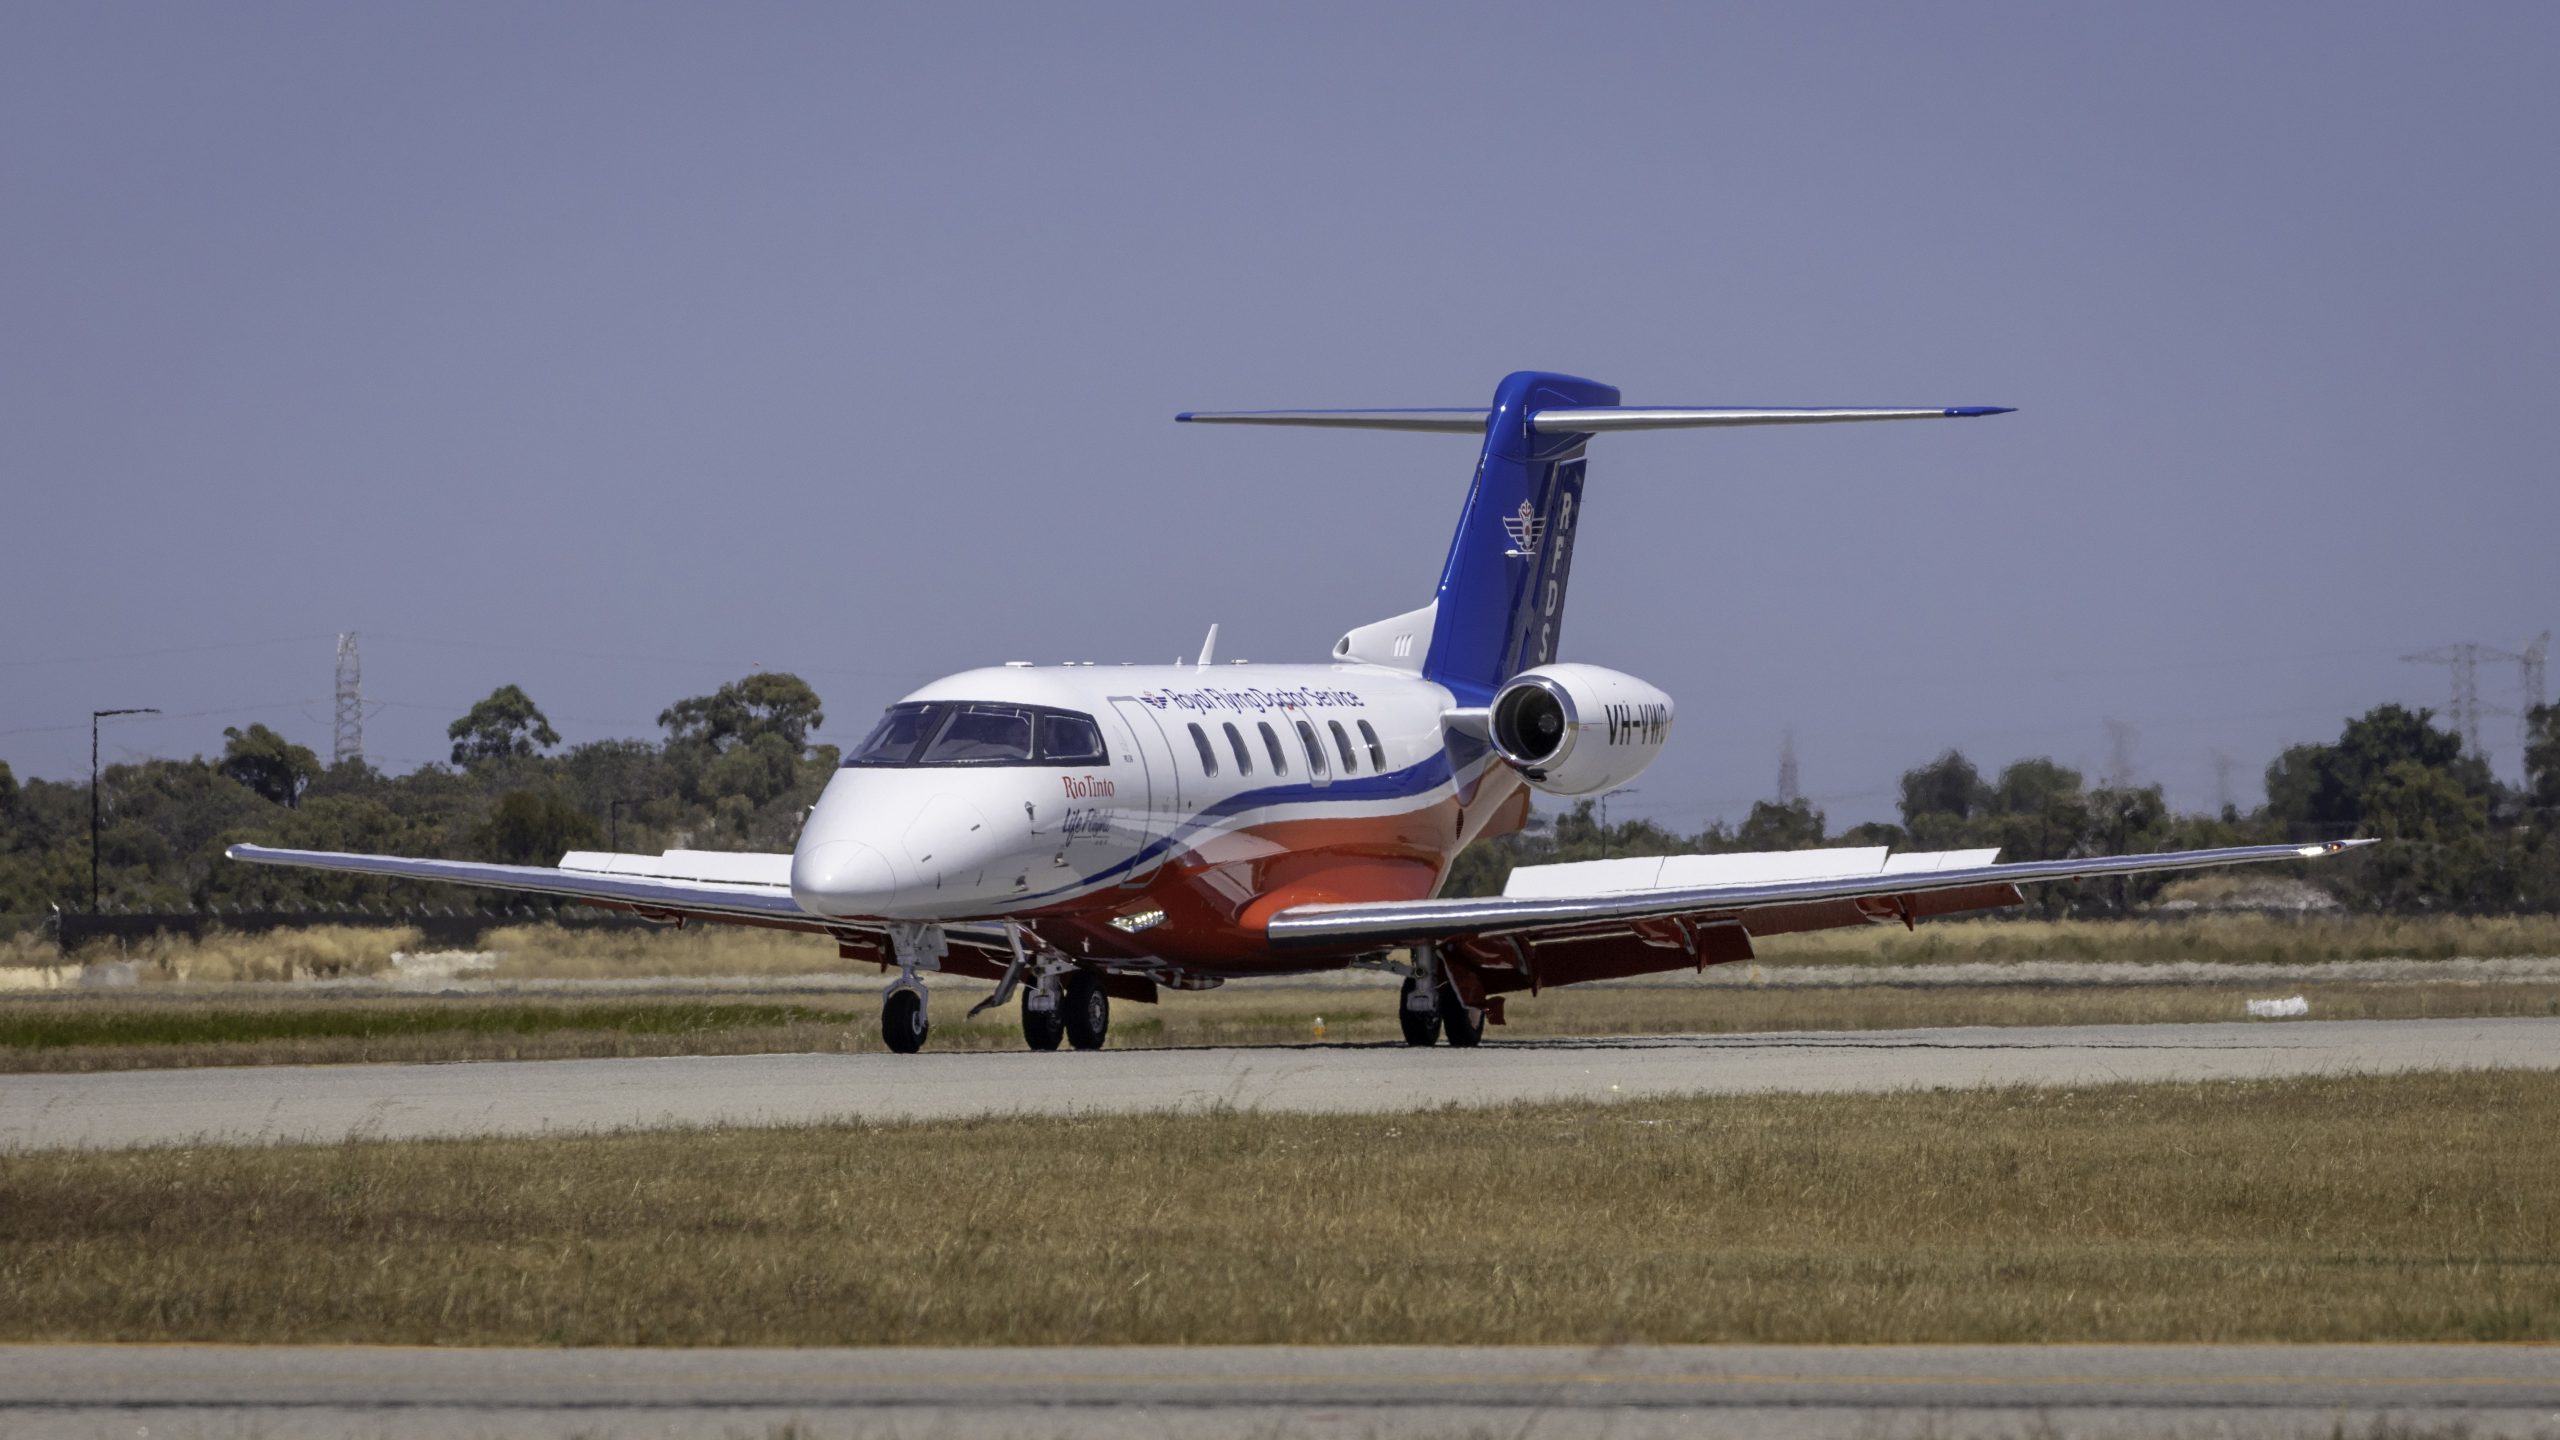 First of four RFDS King Air 350s on its way to Australia